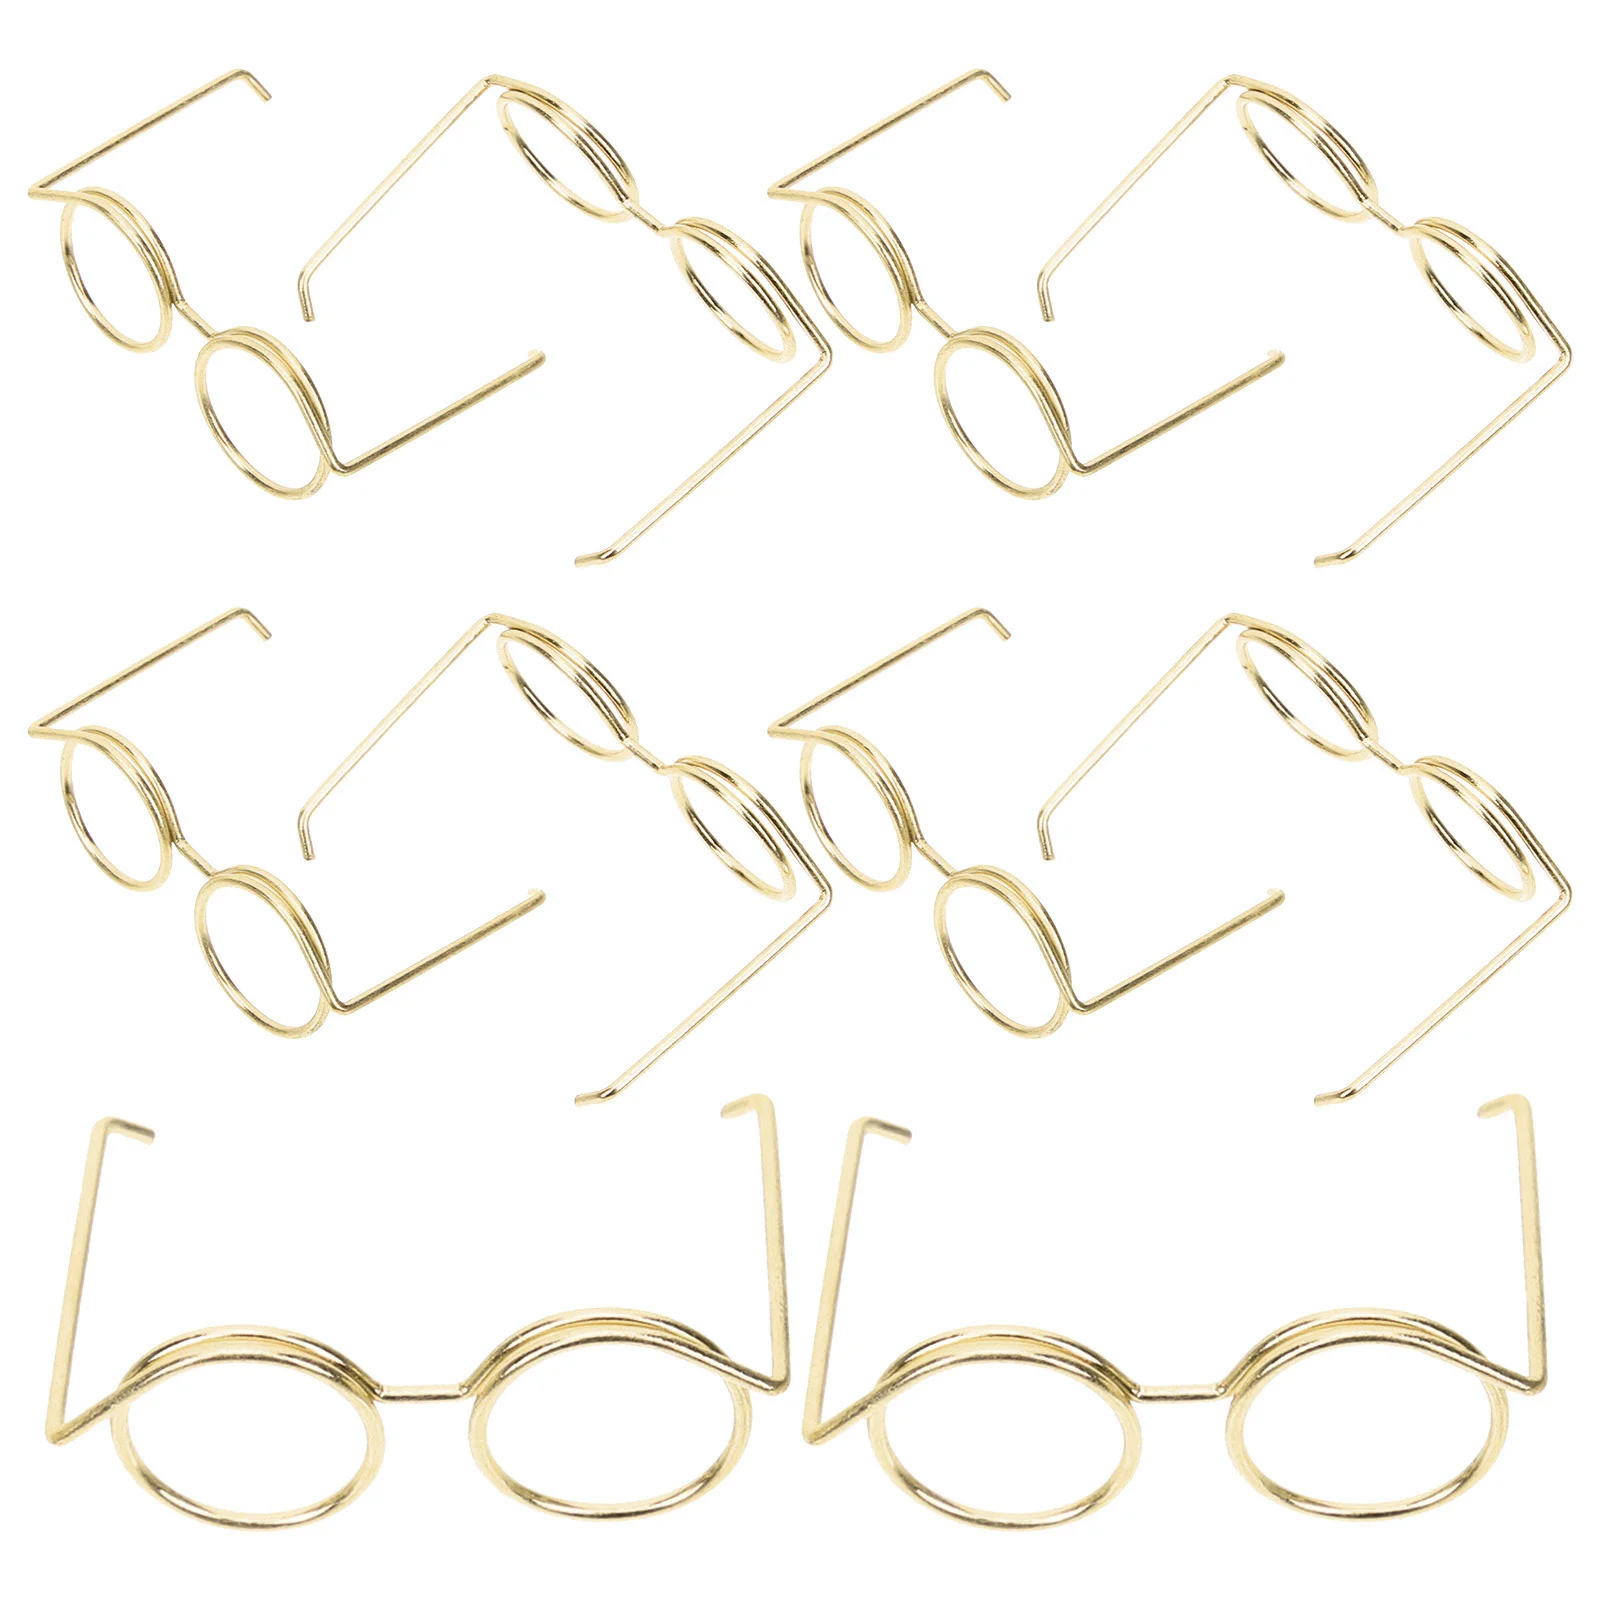 Retro Doll Glasses Metal Round Frame Lensless Eyewear Doll Sunglasses Doll Dress Up Accessories Children Gifts fashion assembleable 2 5 layers options wooden sunglasses stand glasses display jewelry holder bracelet watches show product